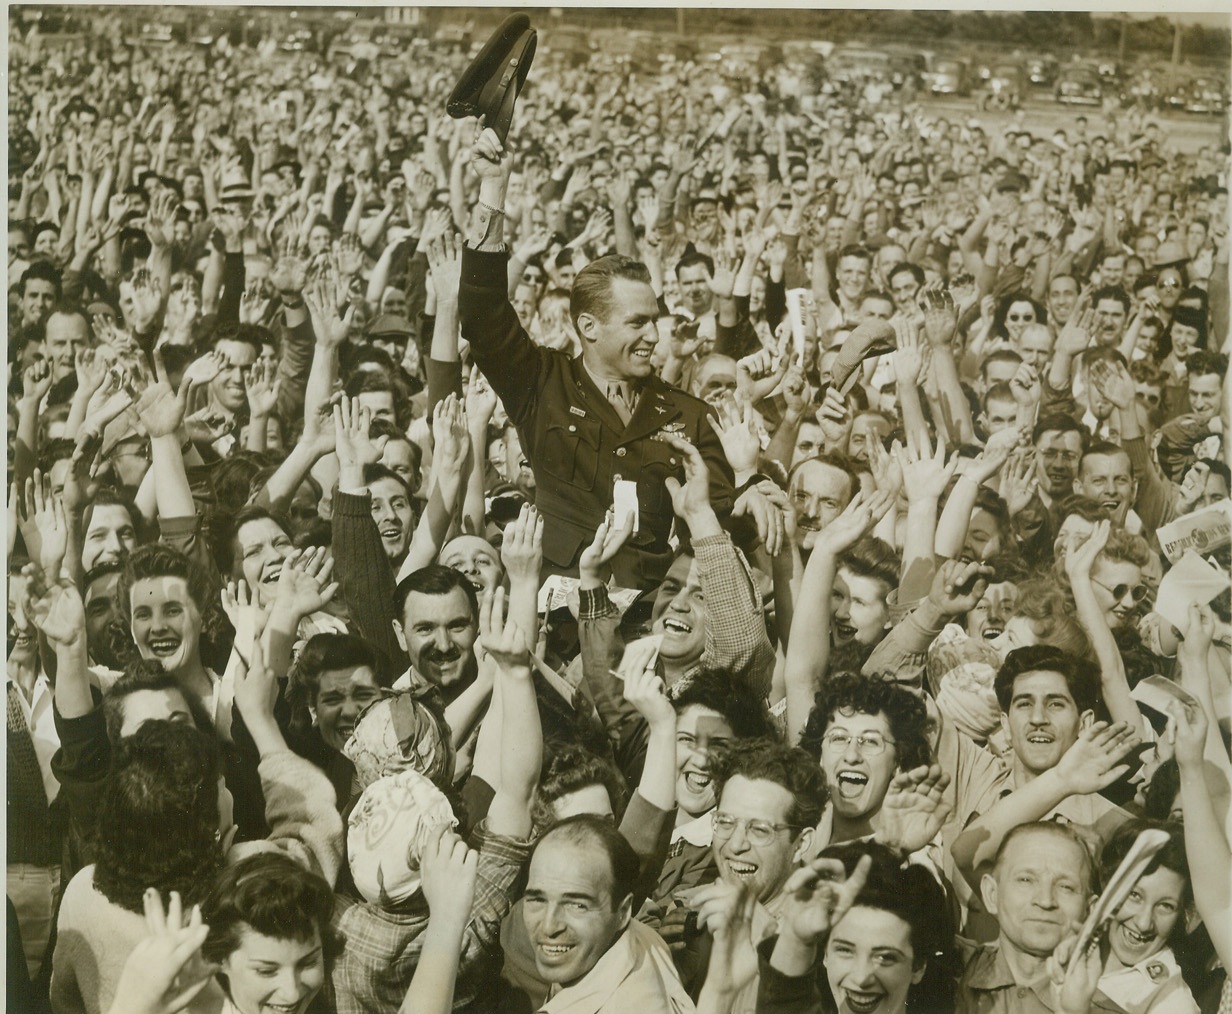 Aircraft Workers Cheer Air Ace, 6/9/1944. FARMINGDALE, L.I. – Clapping and cheering loudly, workers at the Long Island plant of Republic Aviation Corp. lift Maj. Robert S. Johnson to their shoulders in a triumphant parade in recognition of the air ace’s  record of 27 planes downed in the ETO. Maj. Johnson was a guest at the Republic plant, makers of the famous Thunderbolt fighter plane, which he flew in combat. Upon his return to the U.S. the air ace was received at the White House by the President and Mrs. Roosevelt, and was recognized on the floor of the U.S. House and Senate. Credit (ACME);